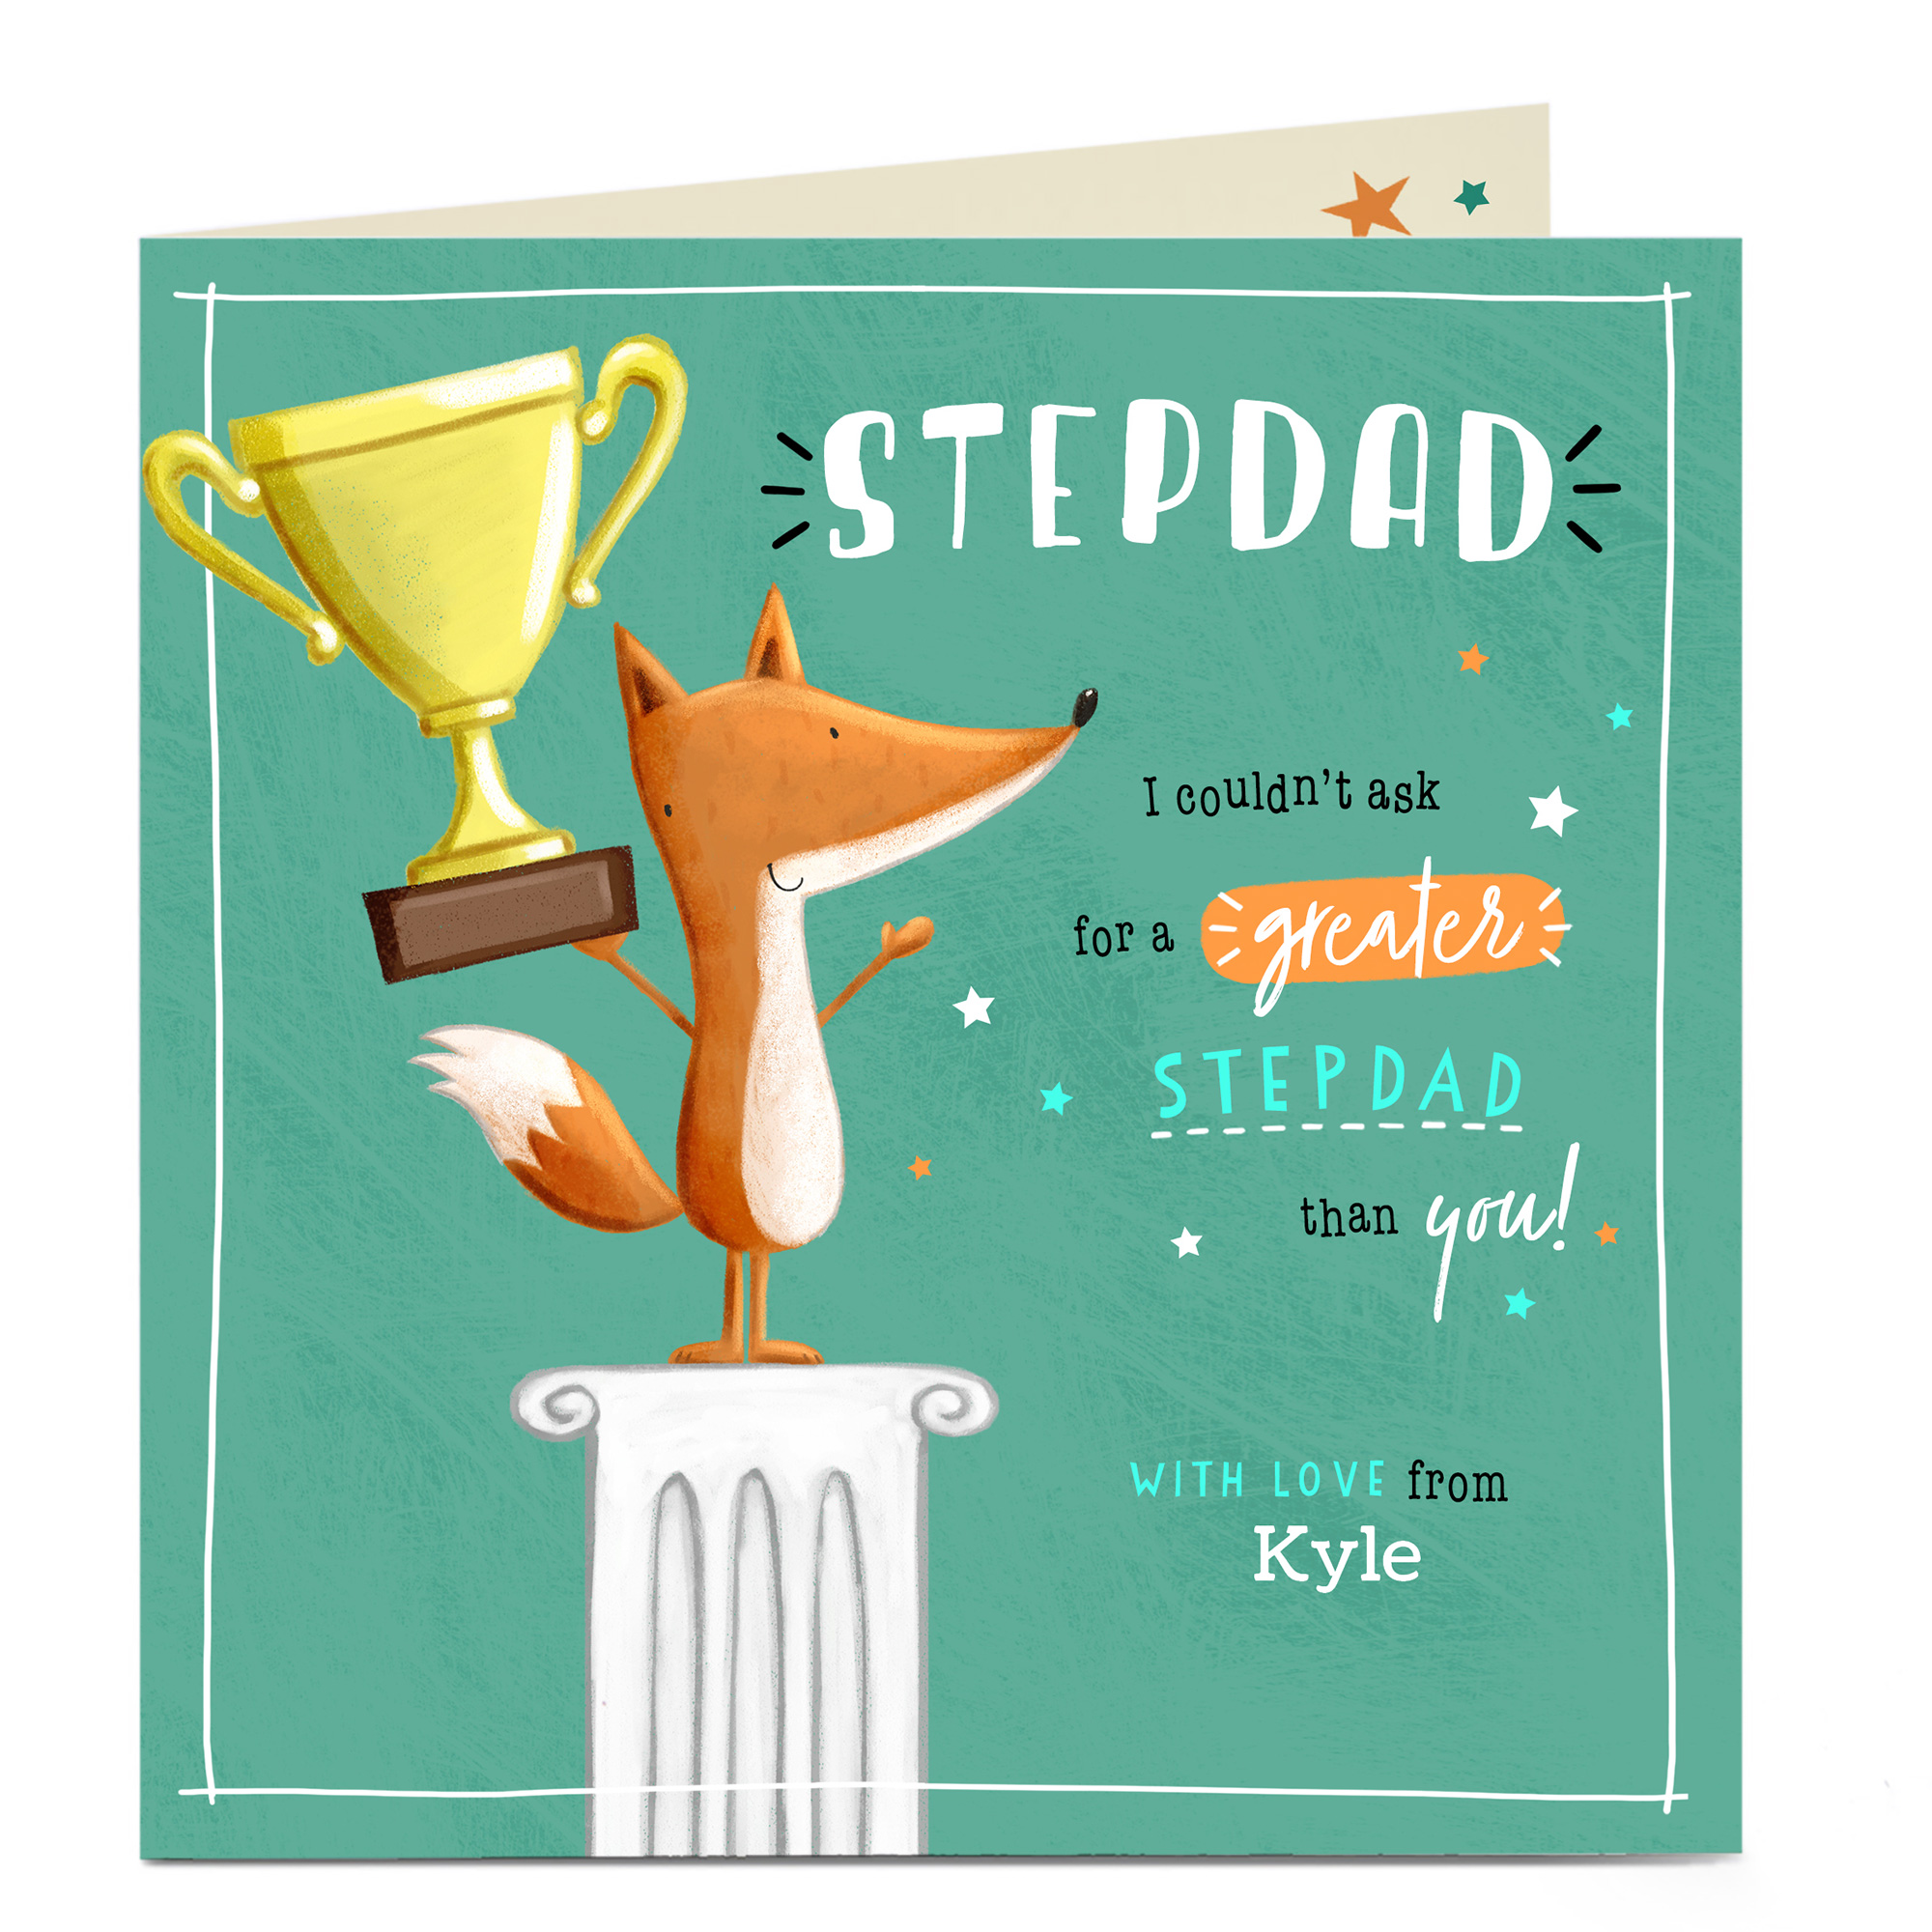 Personalised Father's Day Card - Couldn't Ask For A Greater Stepdad